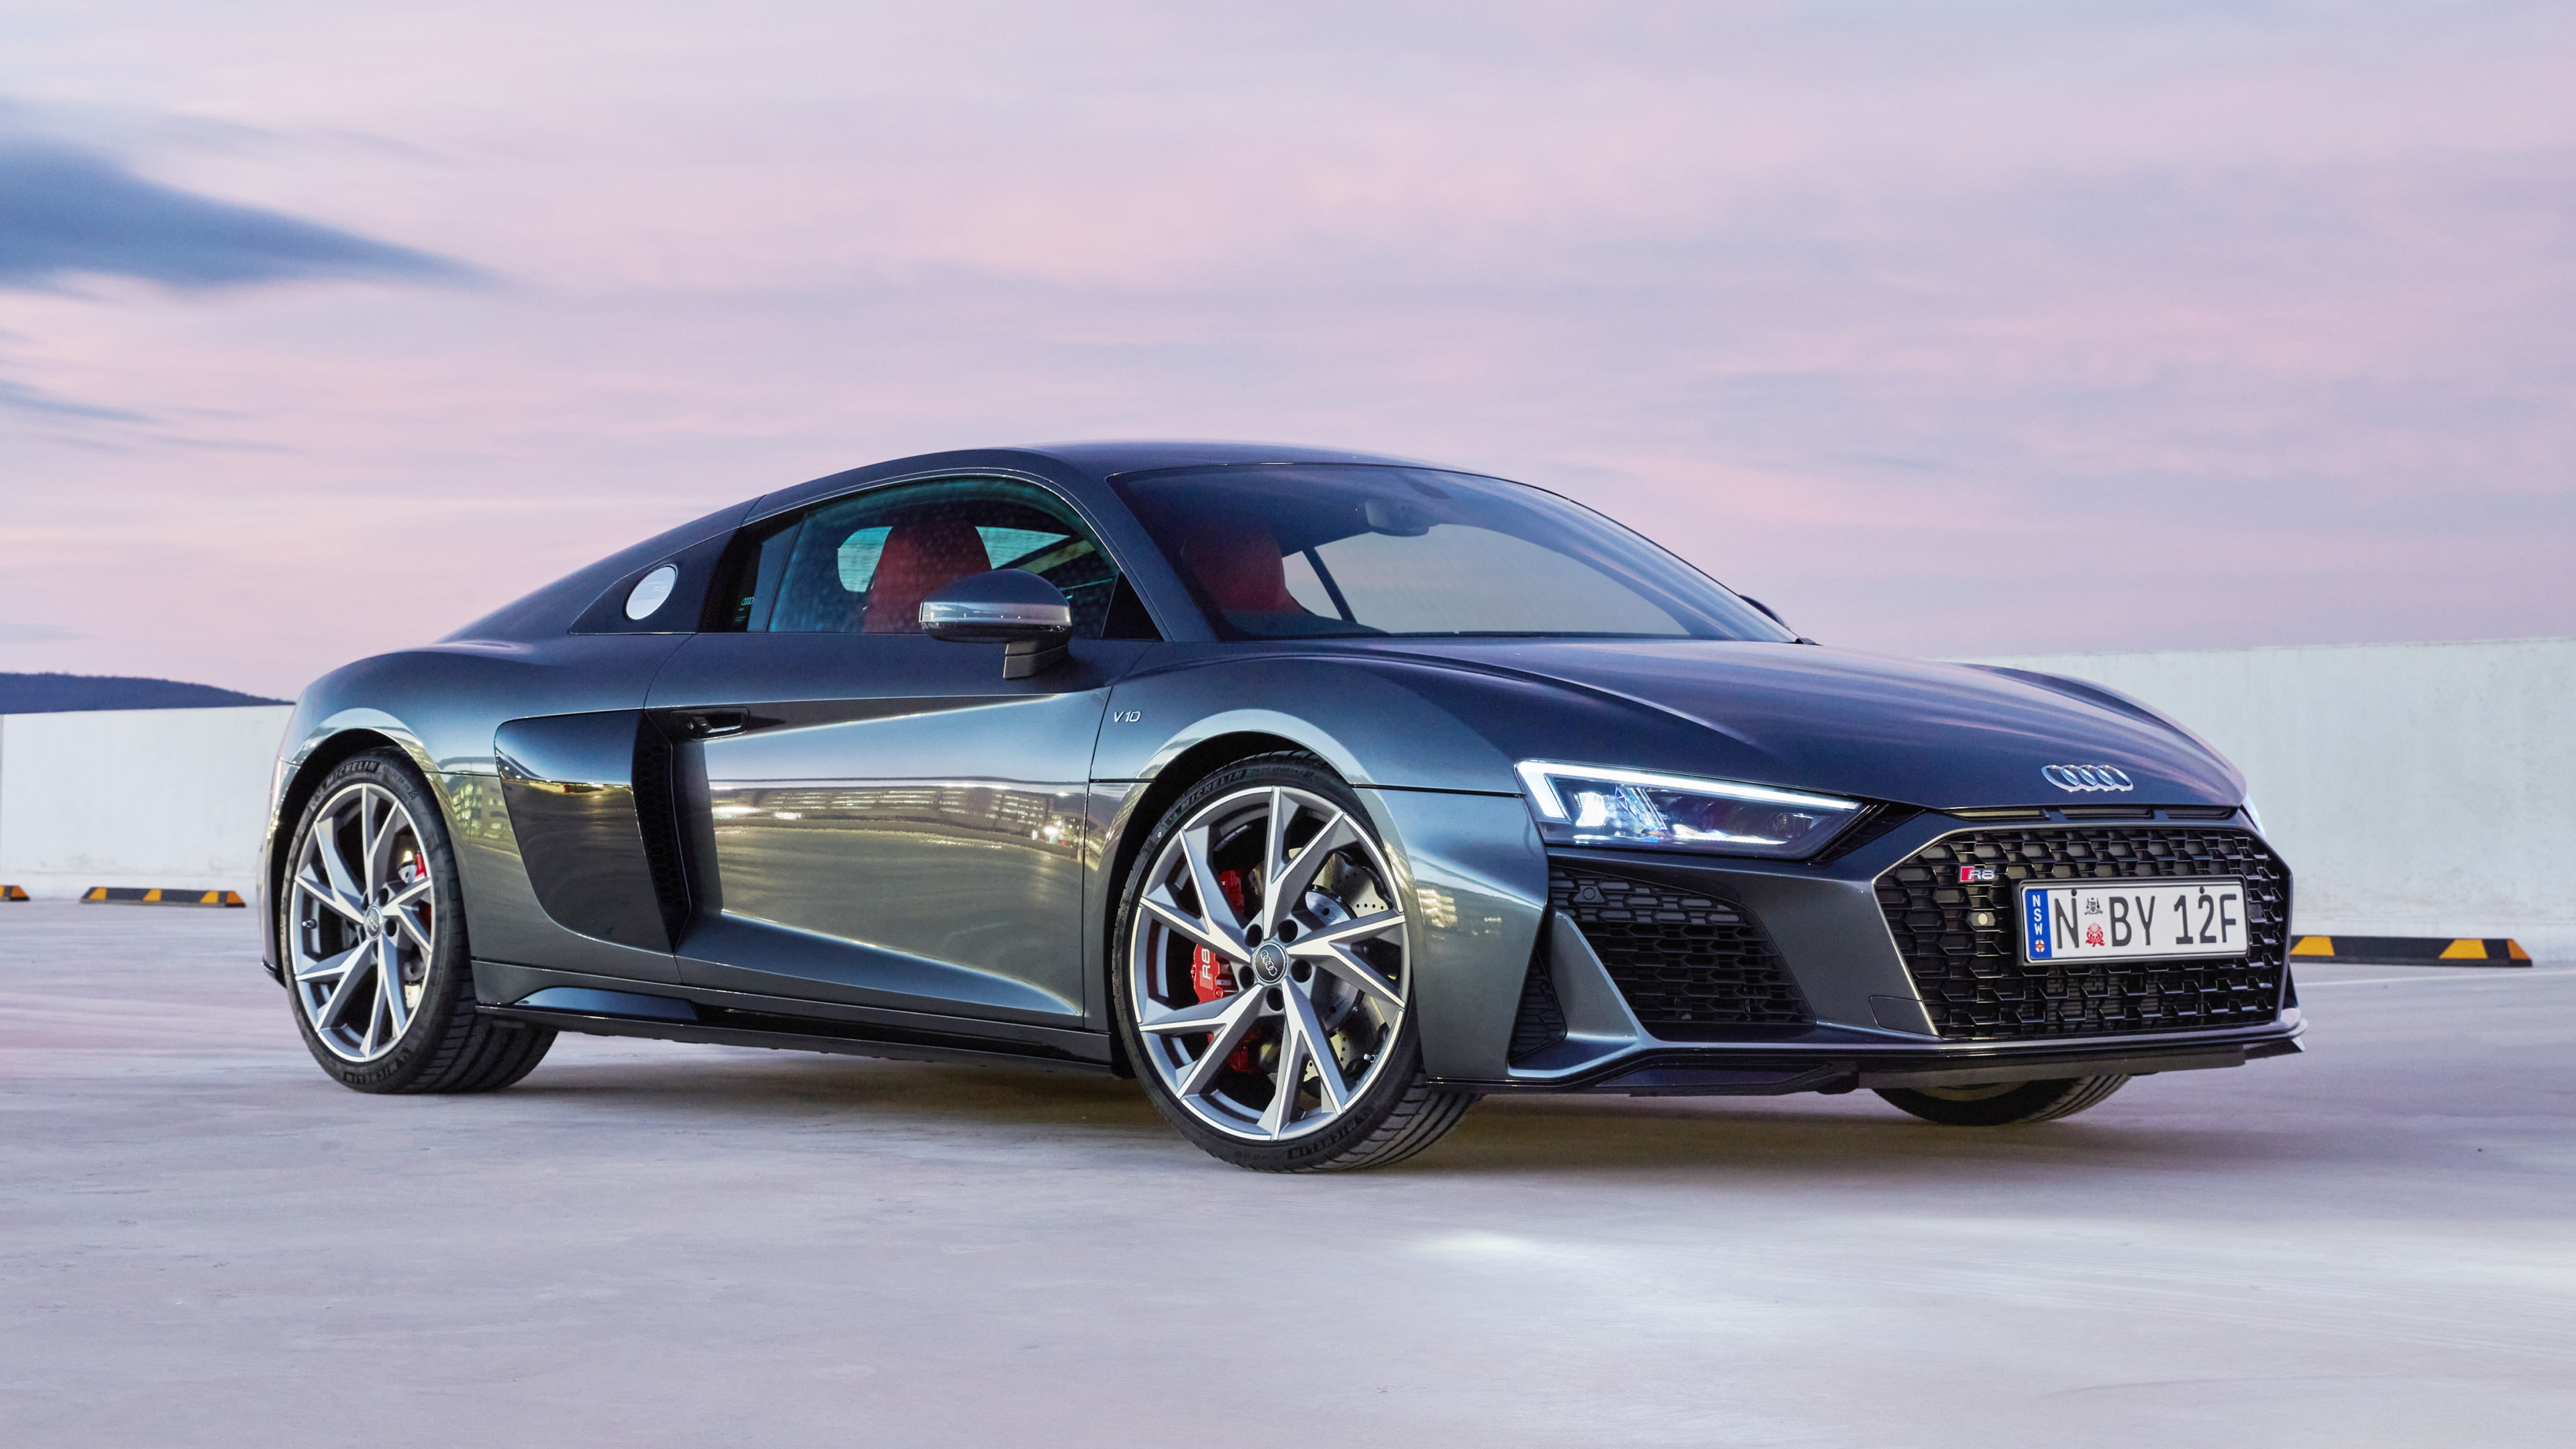 Where Can I Rent A Audi R8 Coupe V10 In Dubai